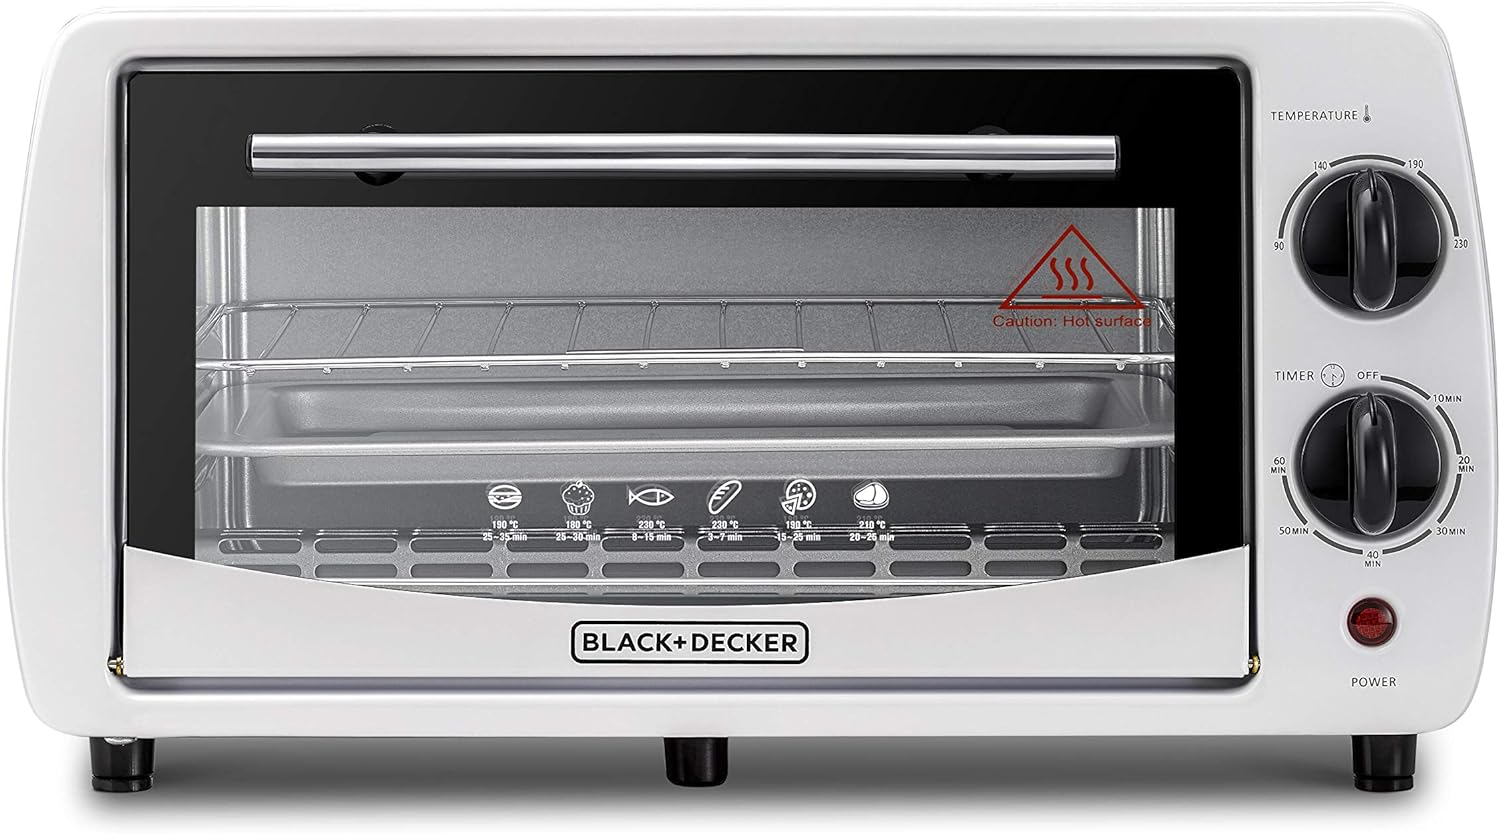 BLACK+DECKER 800W 9L Toaster Oven, 90-230° Temp Setting Double Grill With Convection, Double Glass Door For Safety With Multiple Accessories, For Toasting/ Baking/Broiling TRO9DG-B5